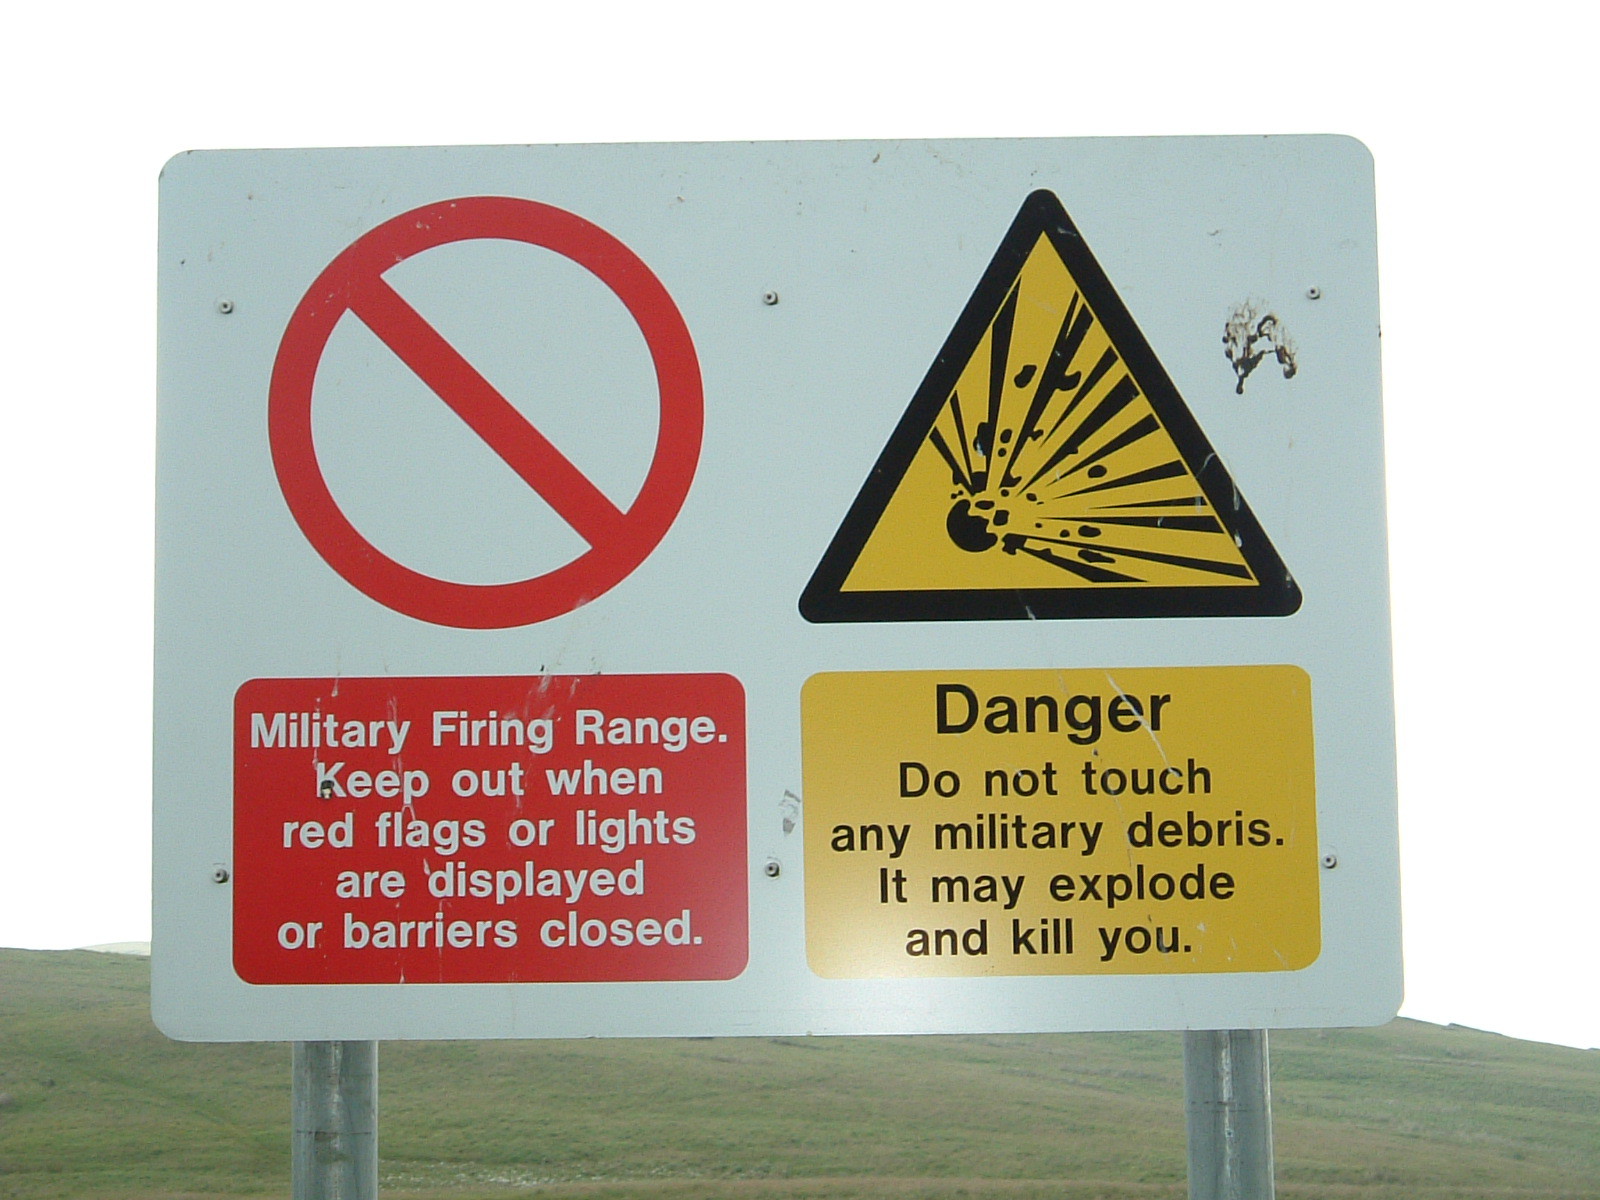 A sign warning of a military firing range